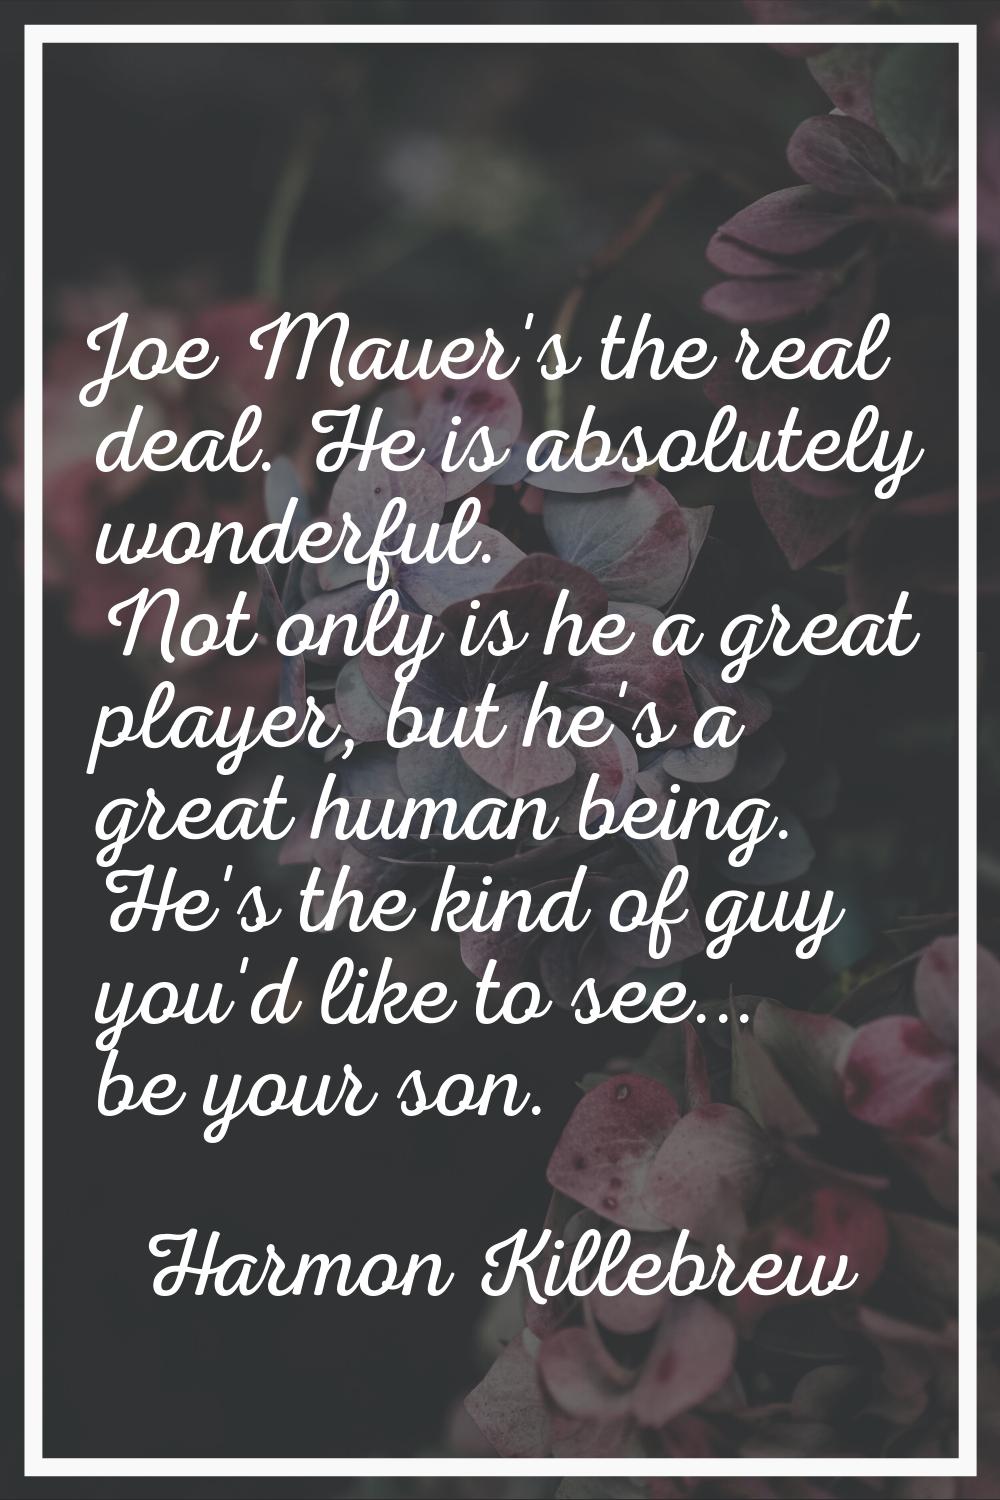 Joe Mauer's the real deal. He is absolutely wonderful. Not only is he a great player, but he's a gr